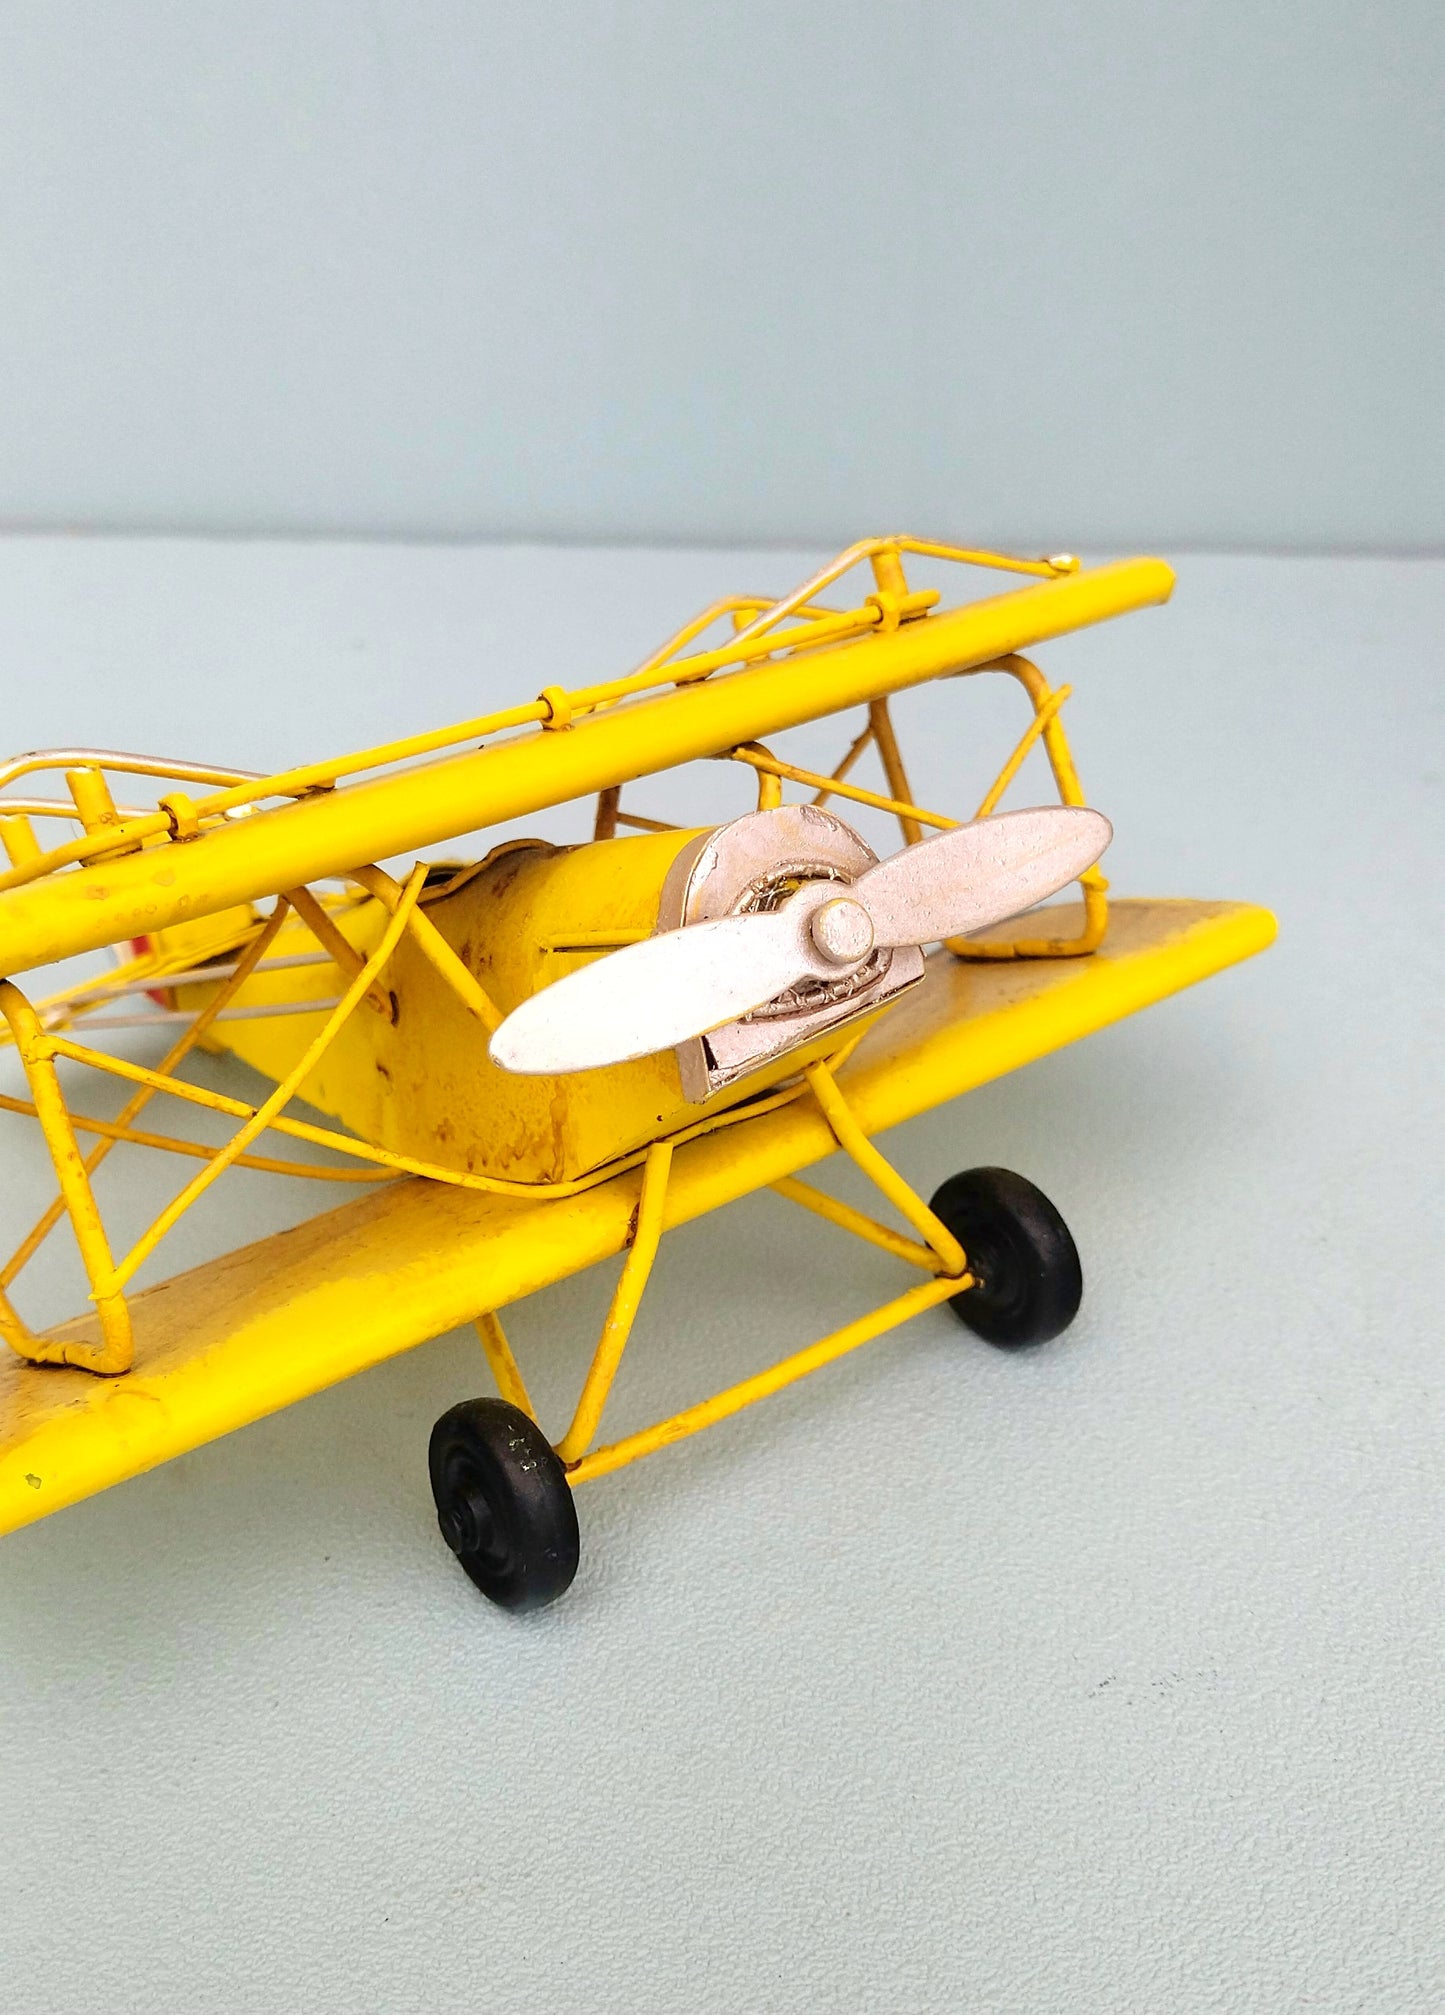 Retro Metal Airplane, Miniature Yellow Biplane, Pilot Dad Gift For Father's Day